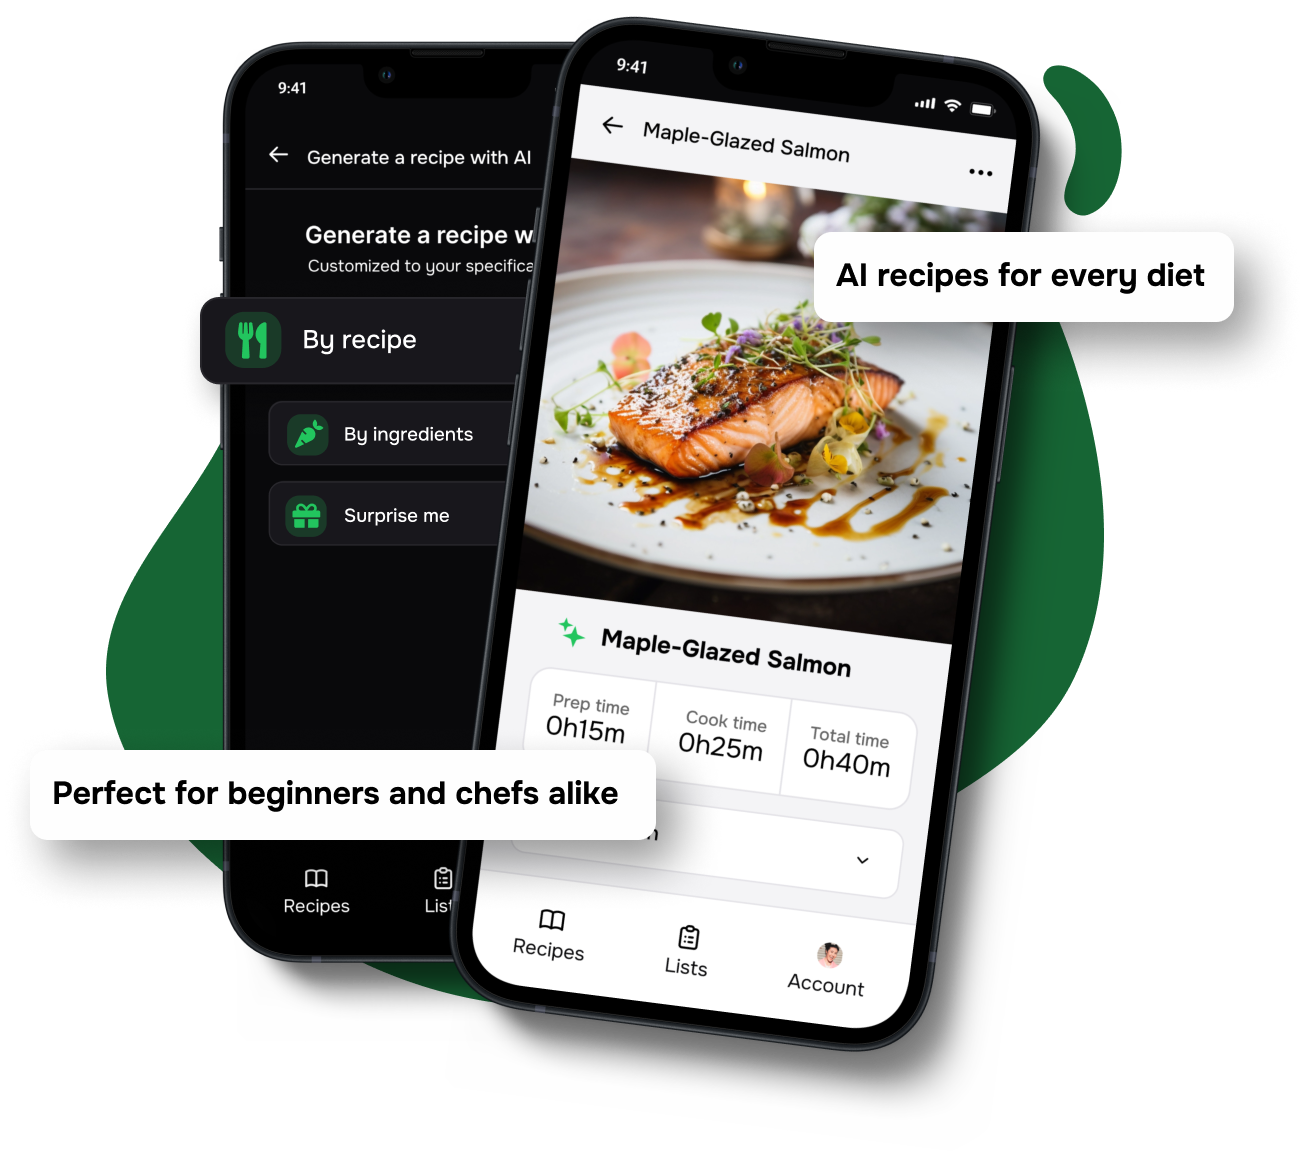 Two images of the Flavorish app on a phone. One showing a Maple-Glazed Salmon recipe. The other showing the AI recipe generation form in the dark mode version of the app.